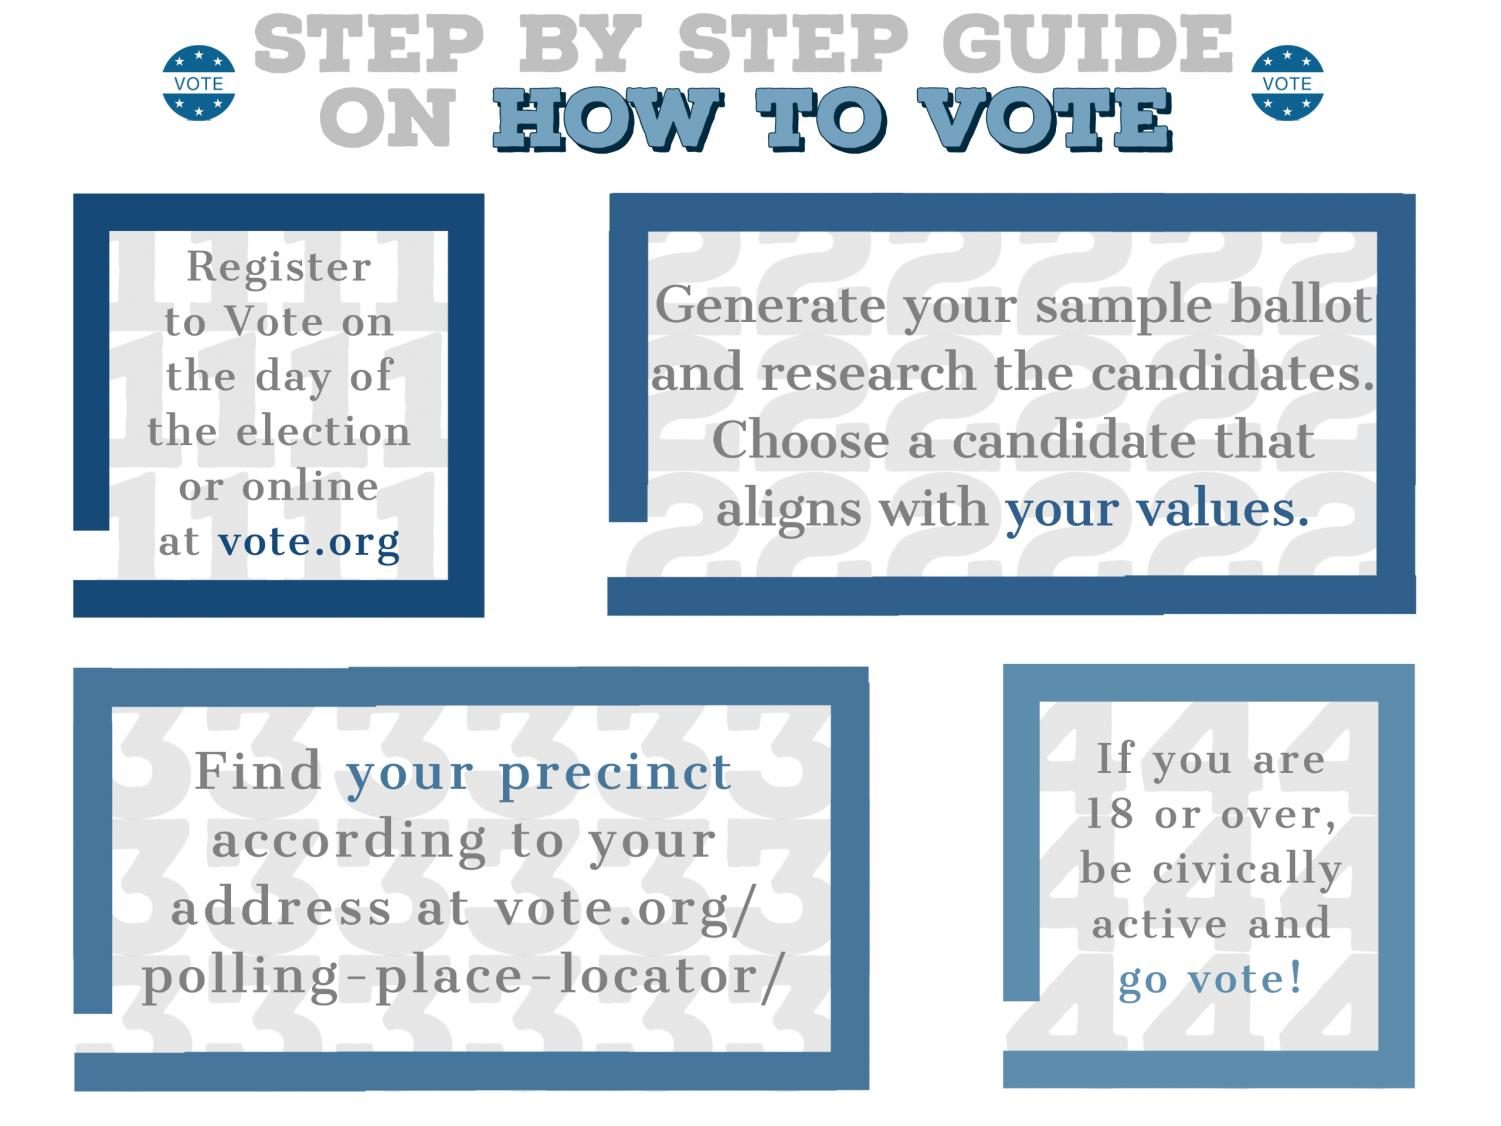 Step by step guide on how to vote